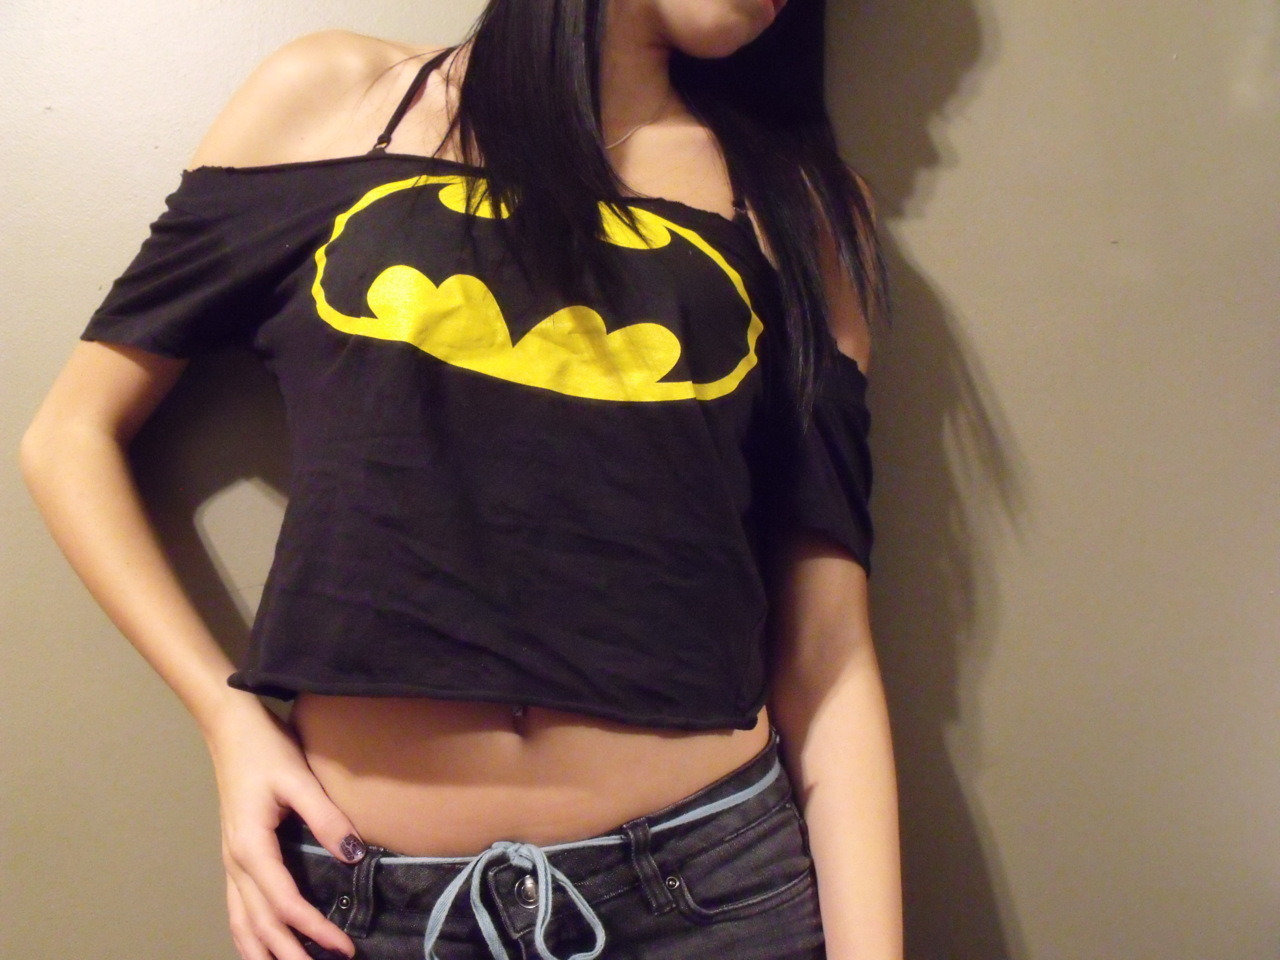 we â™¥ batman and girls. that's all!